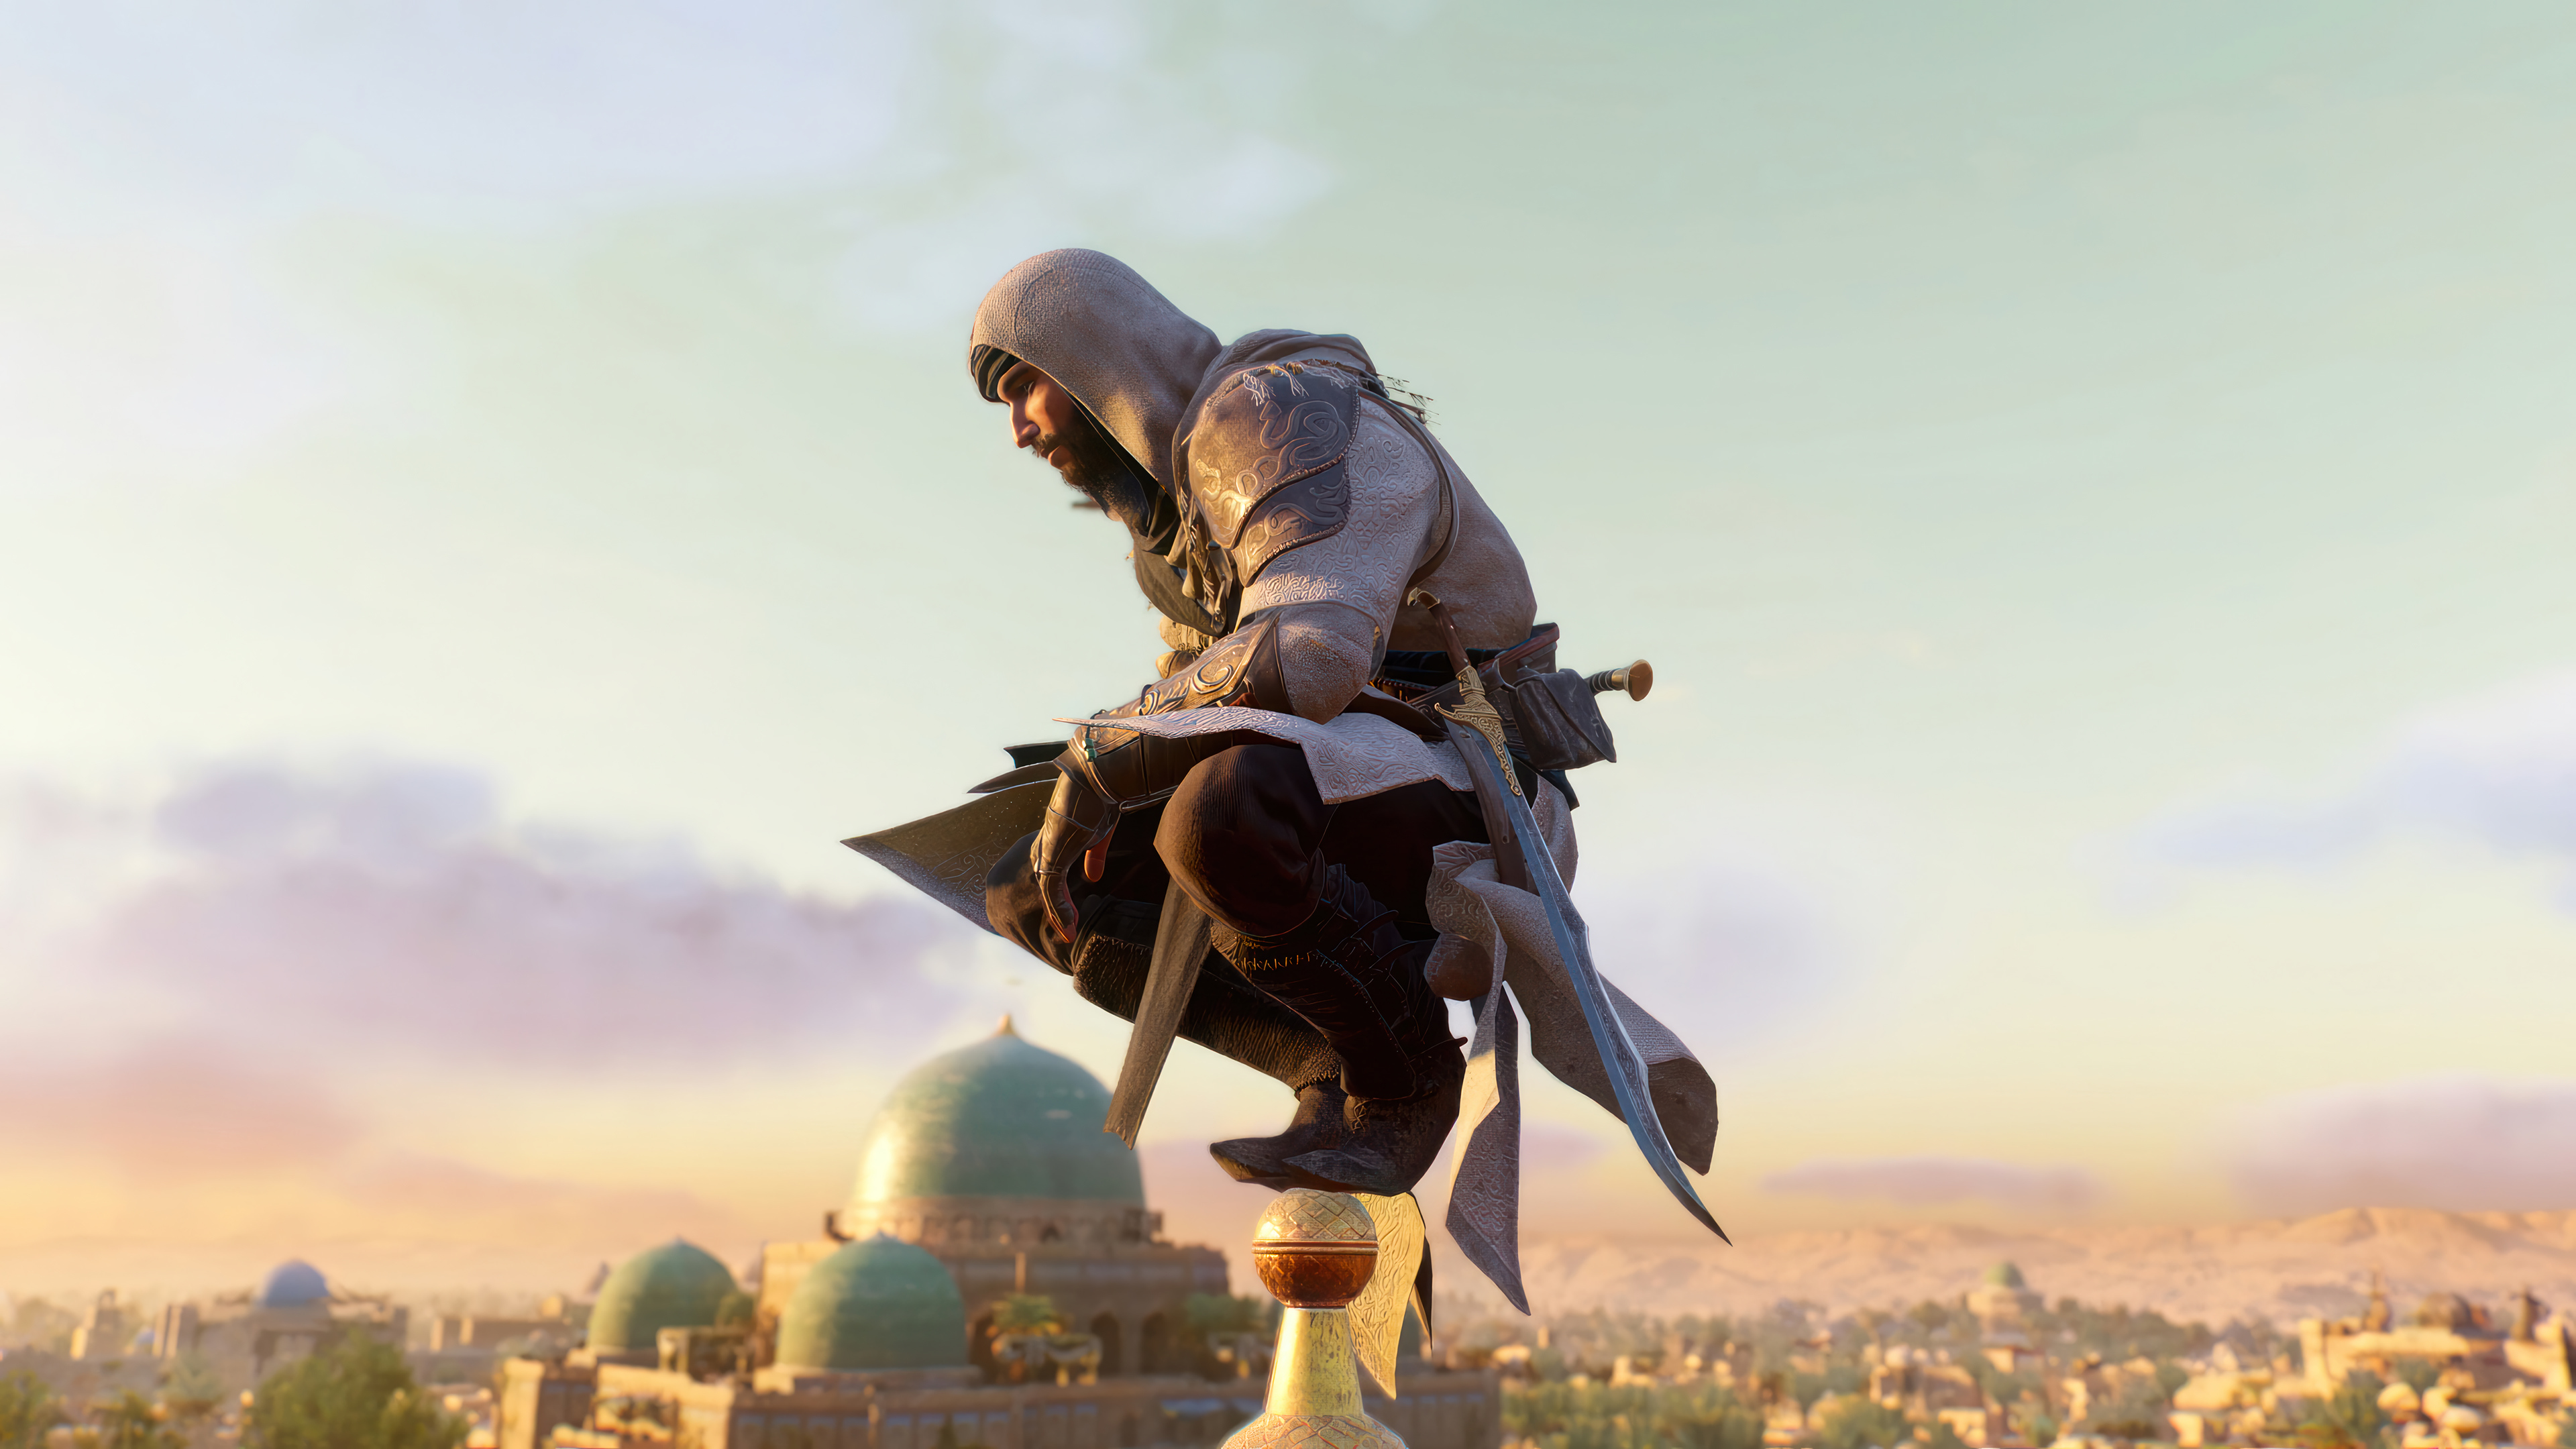 Assassin's Creed Mirage character perched on a rooftop overlooking a historic cityscape at dawn, HD wallpaper for desktop background.